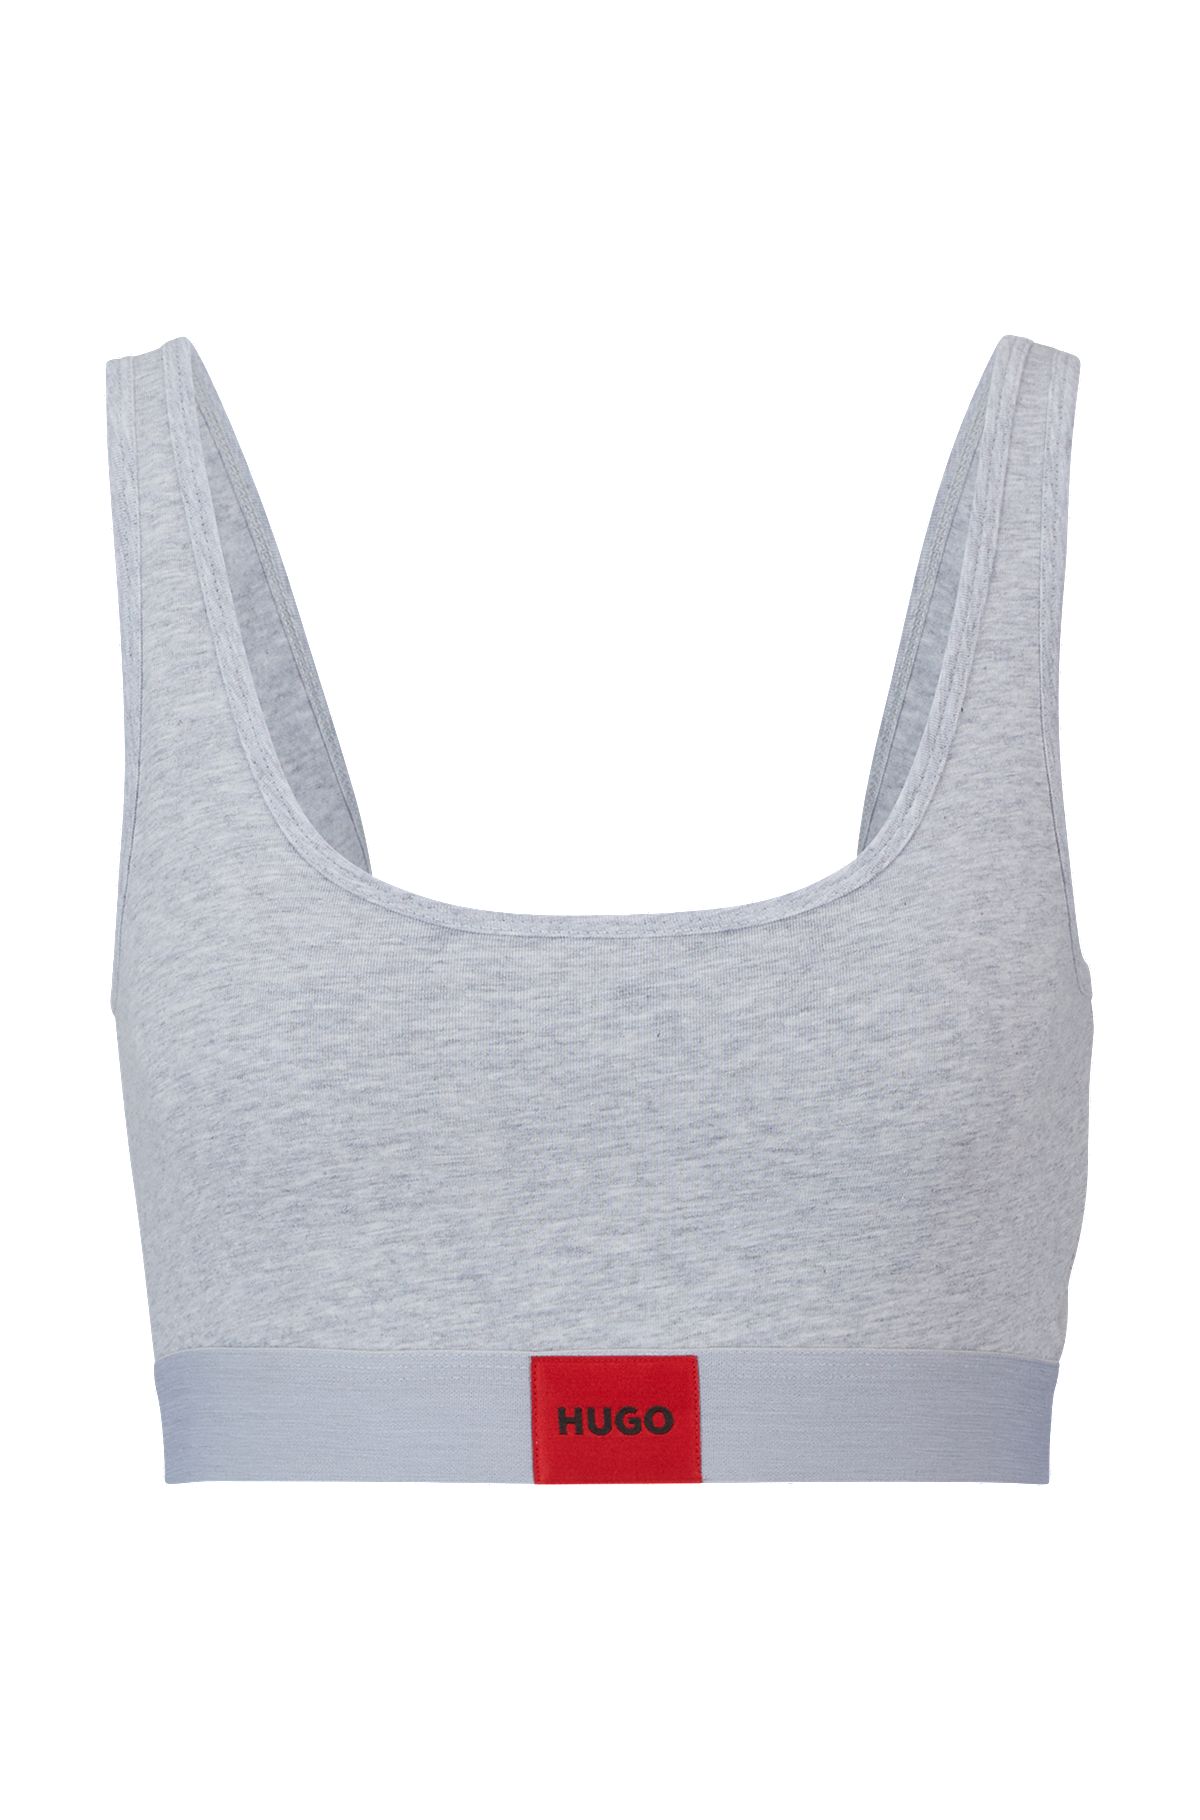 HUGO - with red label logo Stretch-cotton bralette